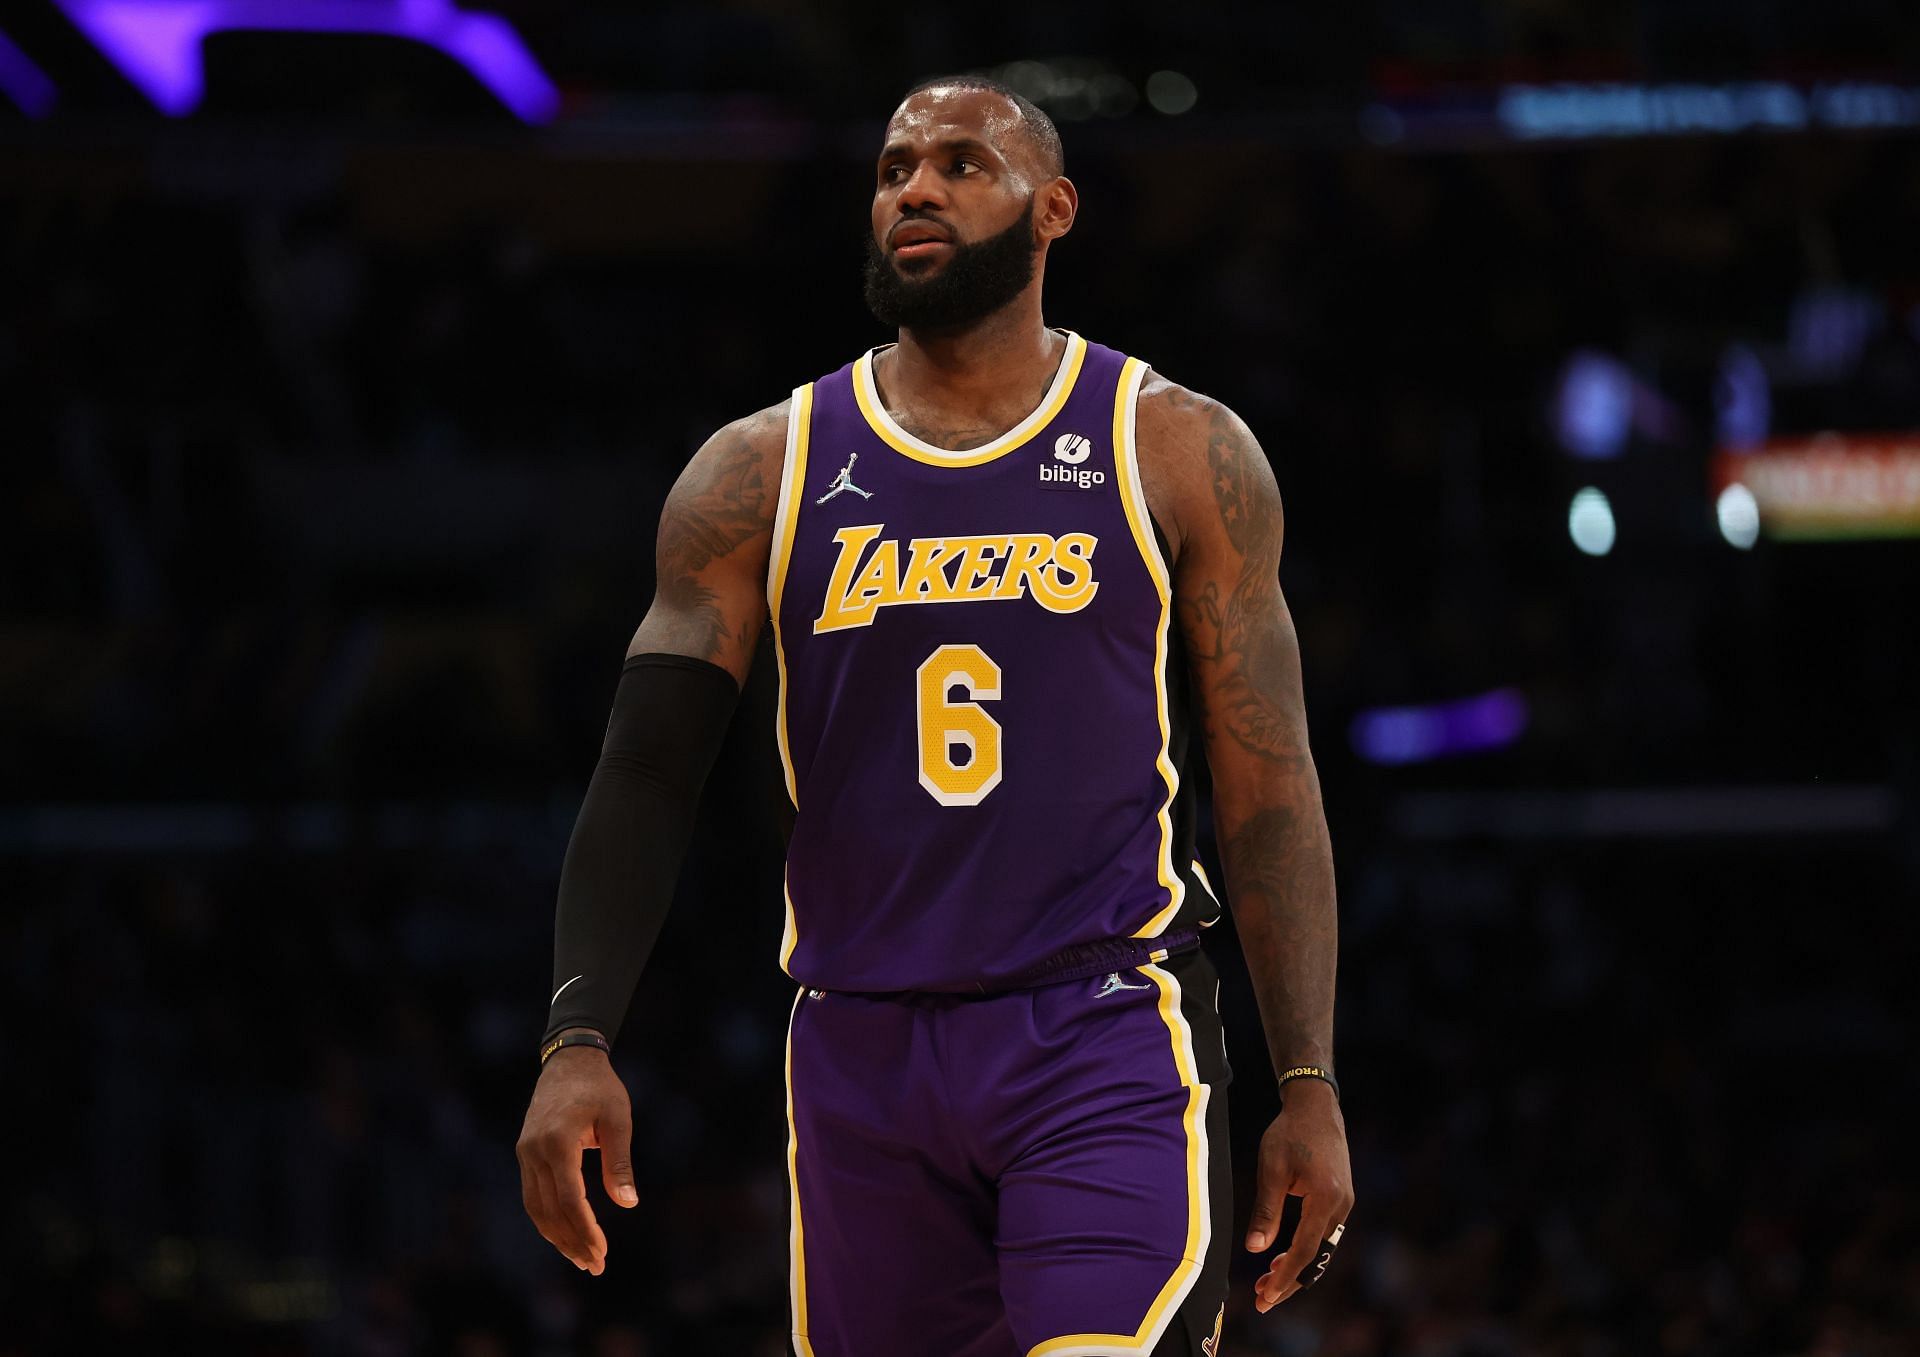 LeBron James with the LA Lakers against his former team, the Cleveland Cavaliers